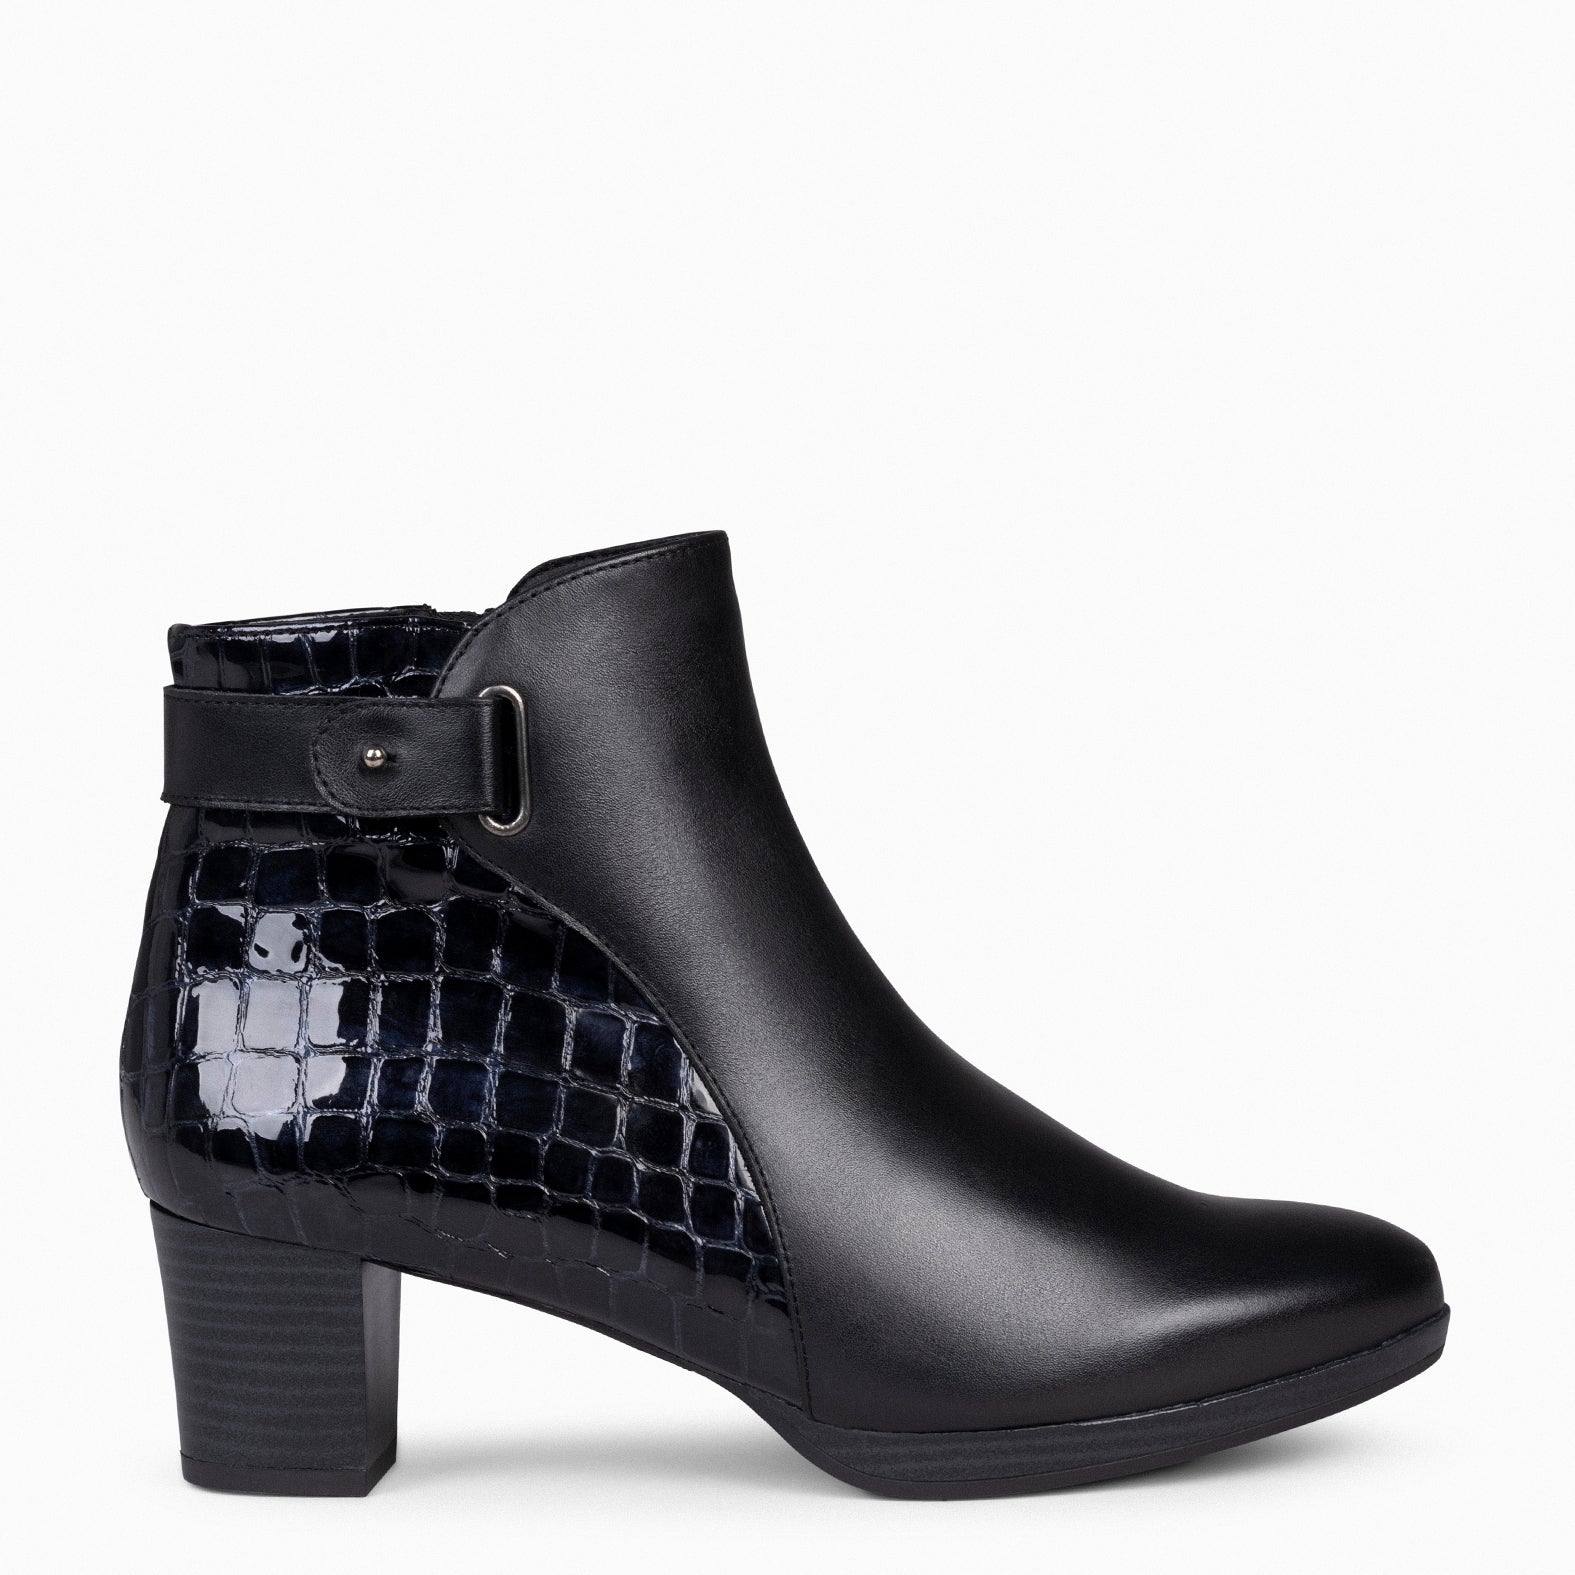 LENA – BLACK Rounded Booties